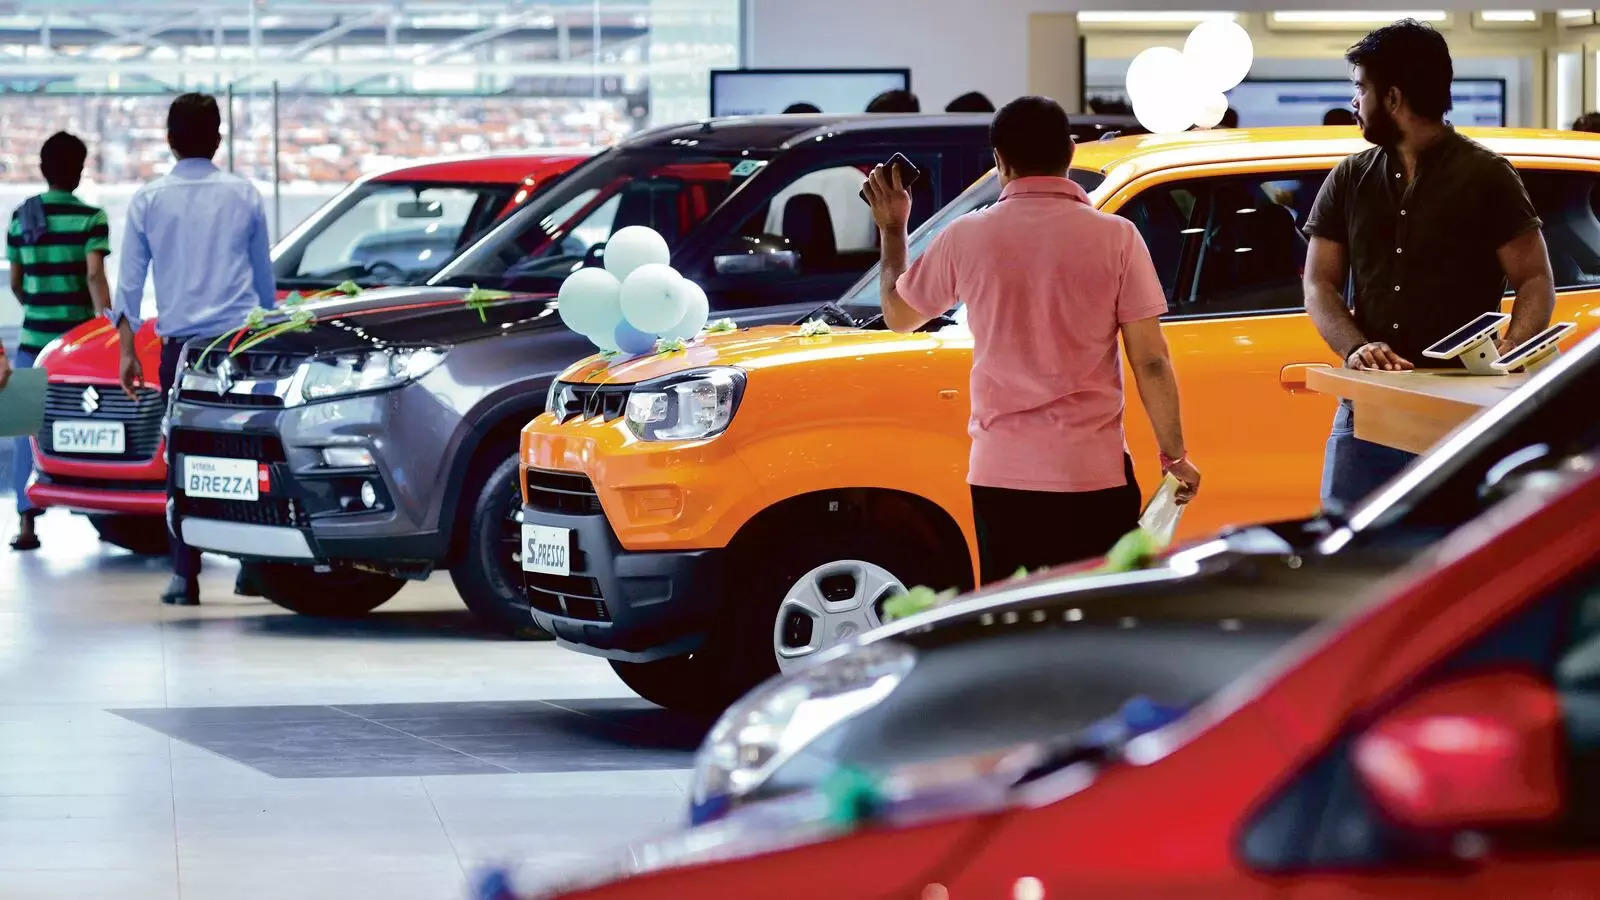 <p>In India, market share is calculated on the basis of factory dispatches rather than dealership sales. Consequently, original equipment makers follow a push, rather than pull, strategy. This increases dealer inventory and working capital needs. </p>